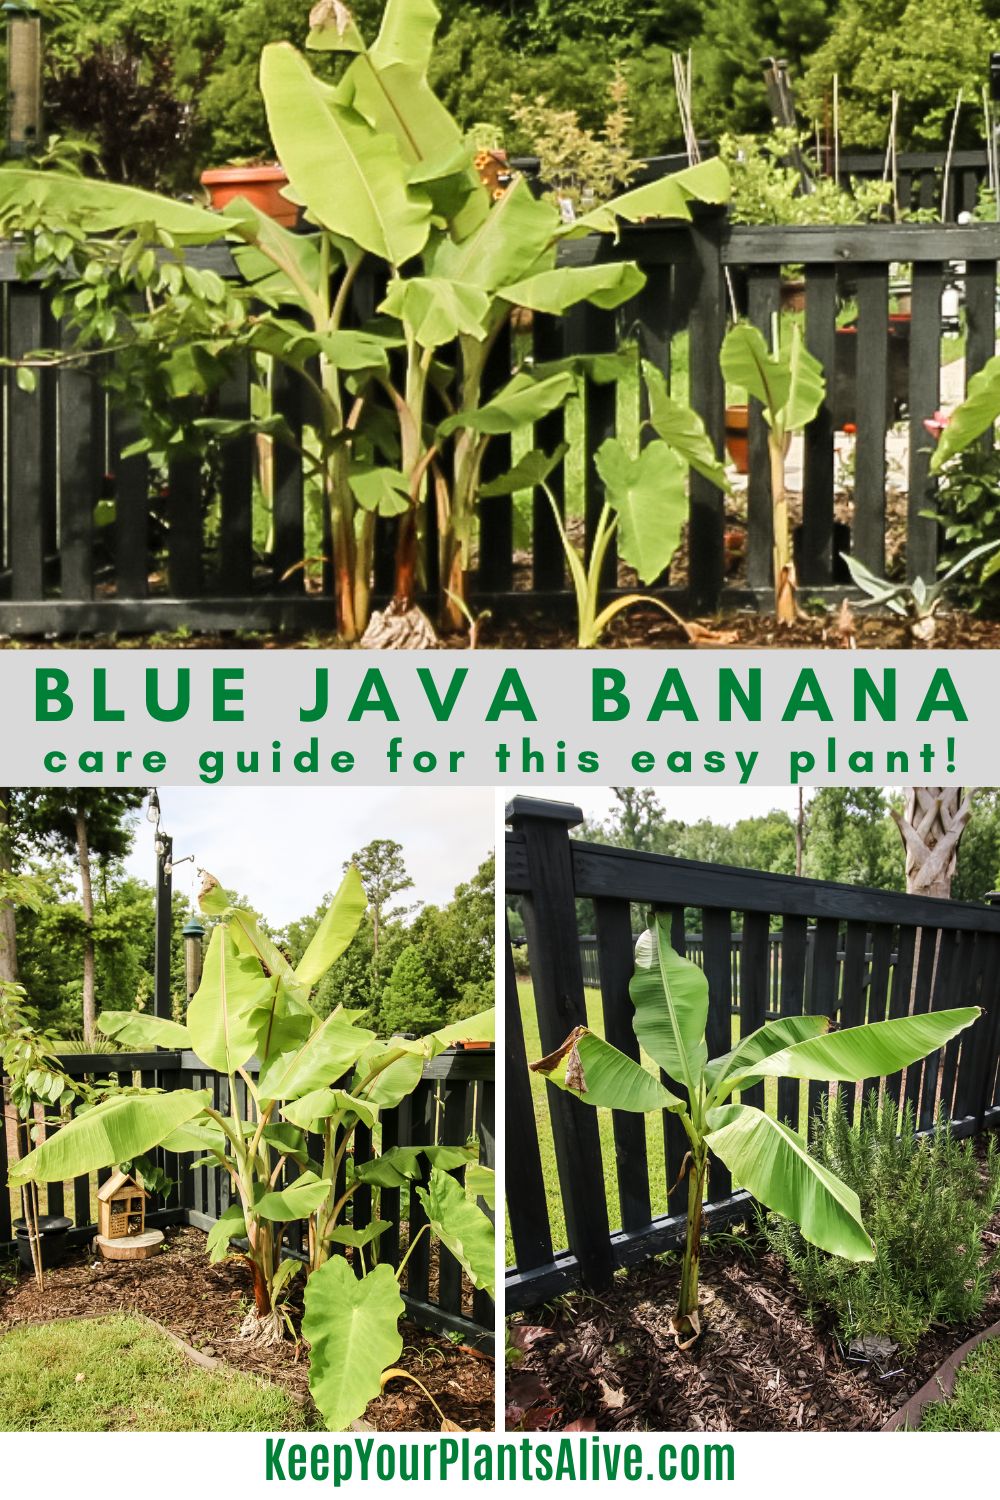 Fact check: Blue Java bananas are not bright blue